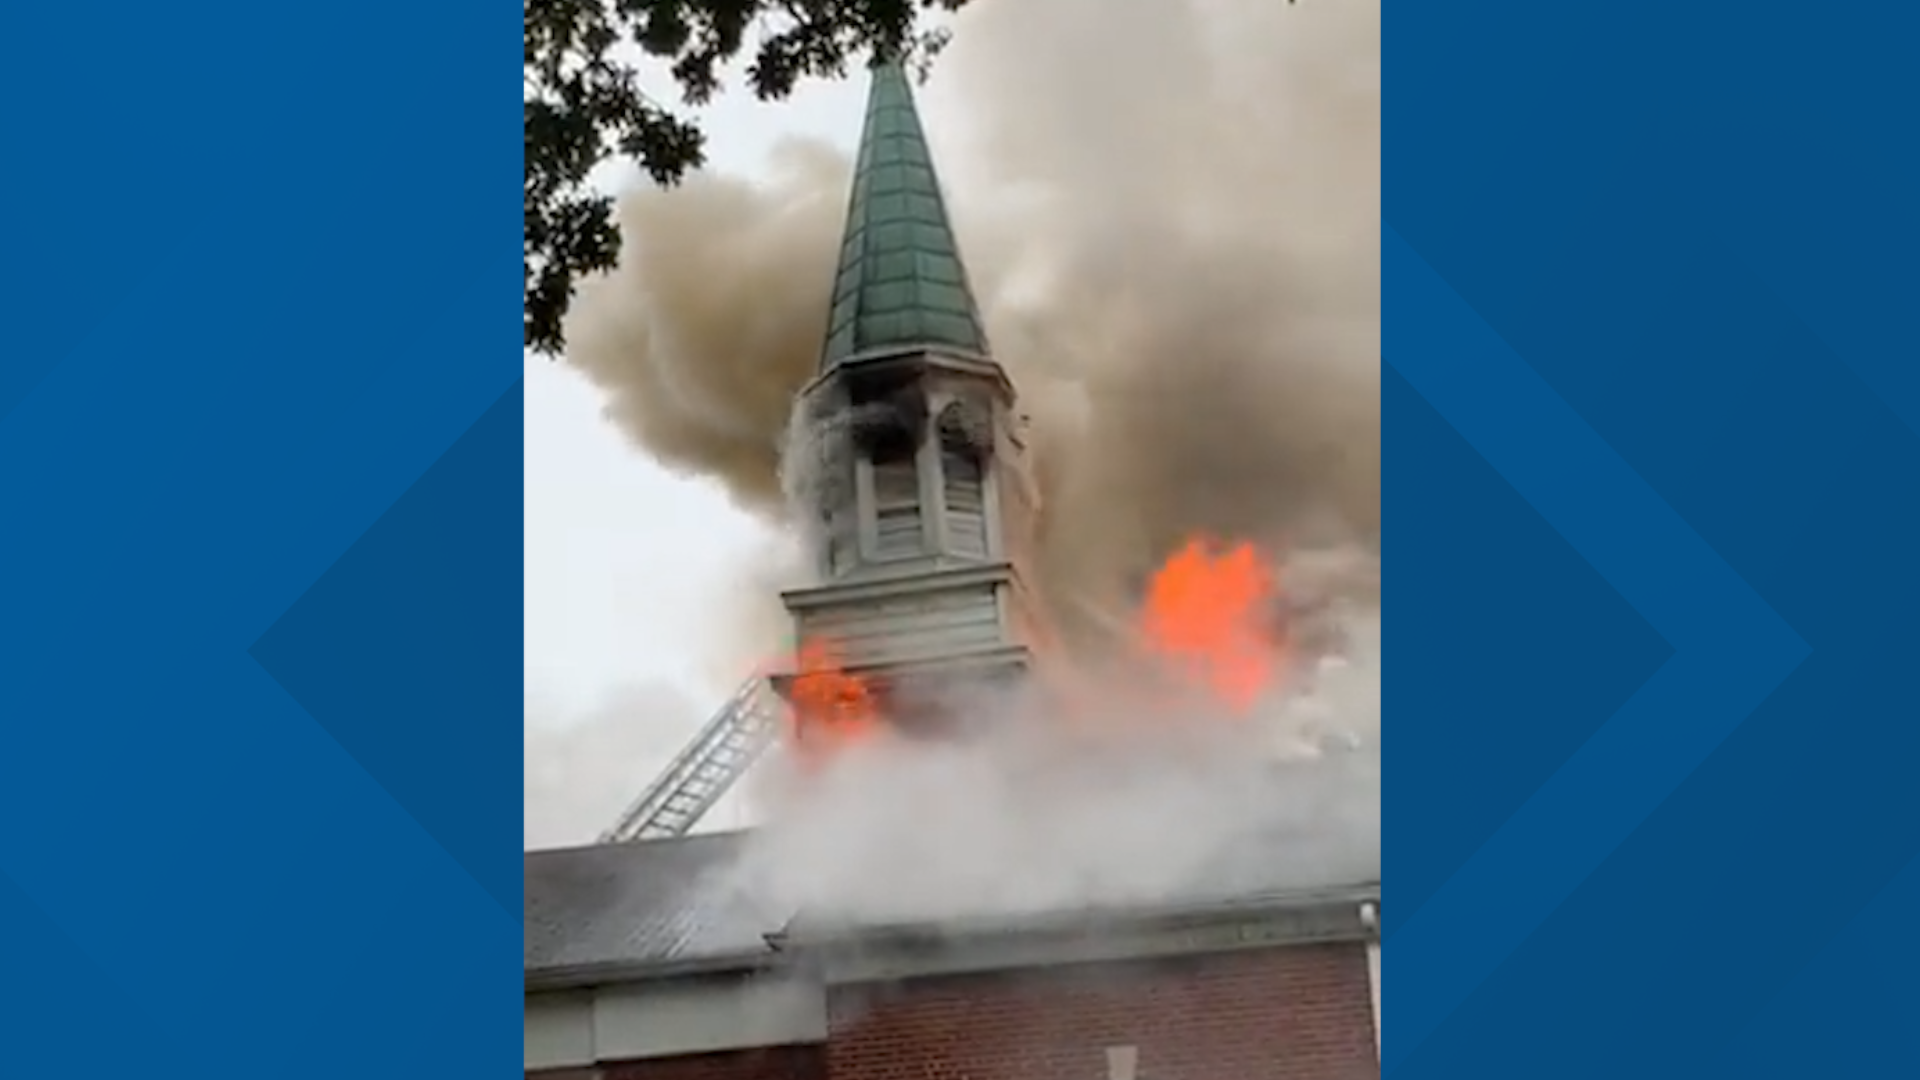 A fire at a vacant church near the Charlotte Douglas International Airport is under control with no injuries reported.